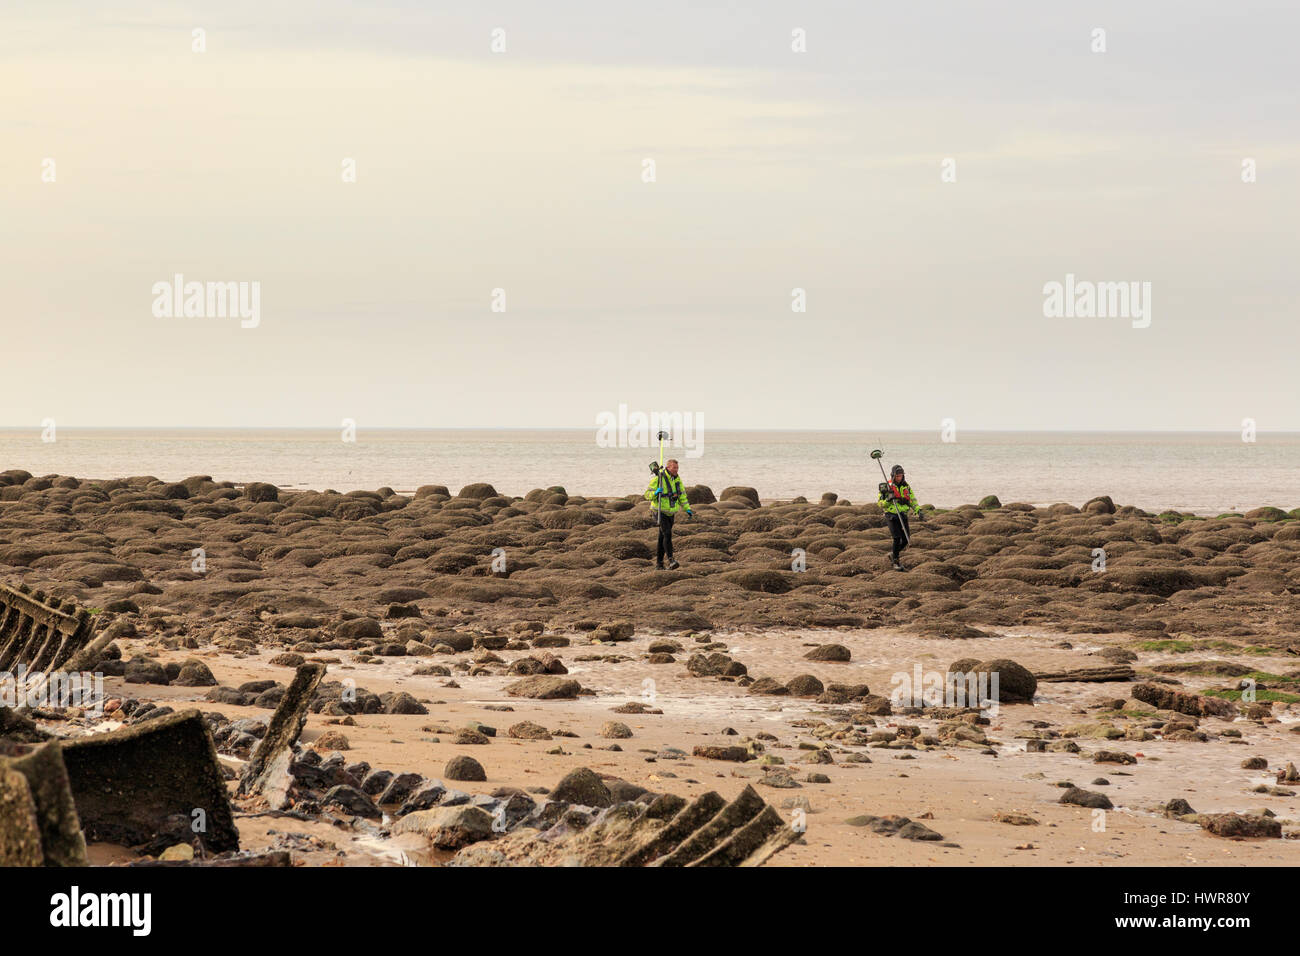 HUNSTANTON, ENGLAND - MARCH 10: Men from Environment agency taking GPS and Bathymetric readings during survey on Hunstanton beach. In Hunstanton, Norf Stock Photo